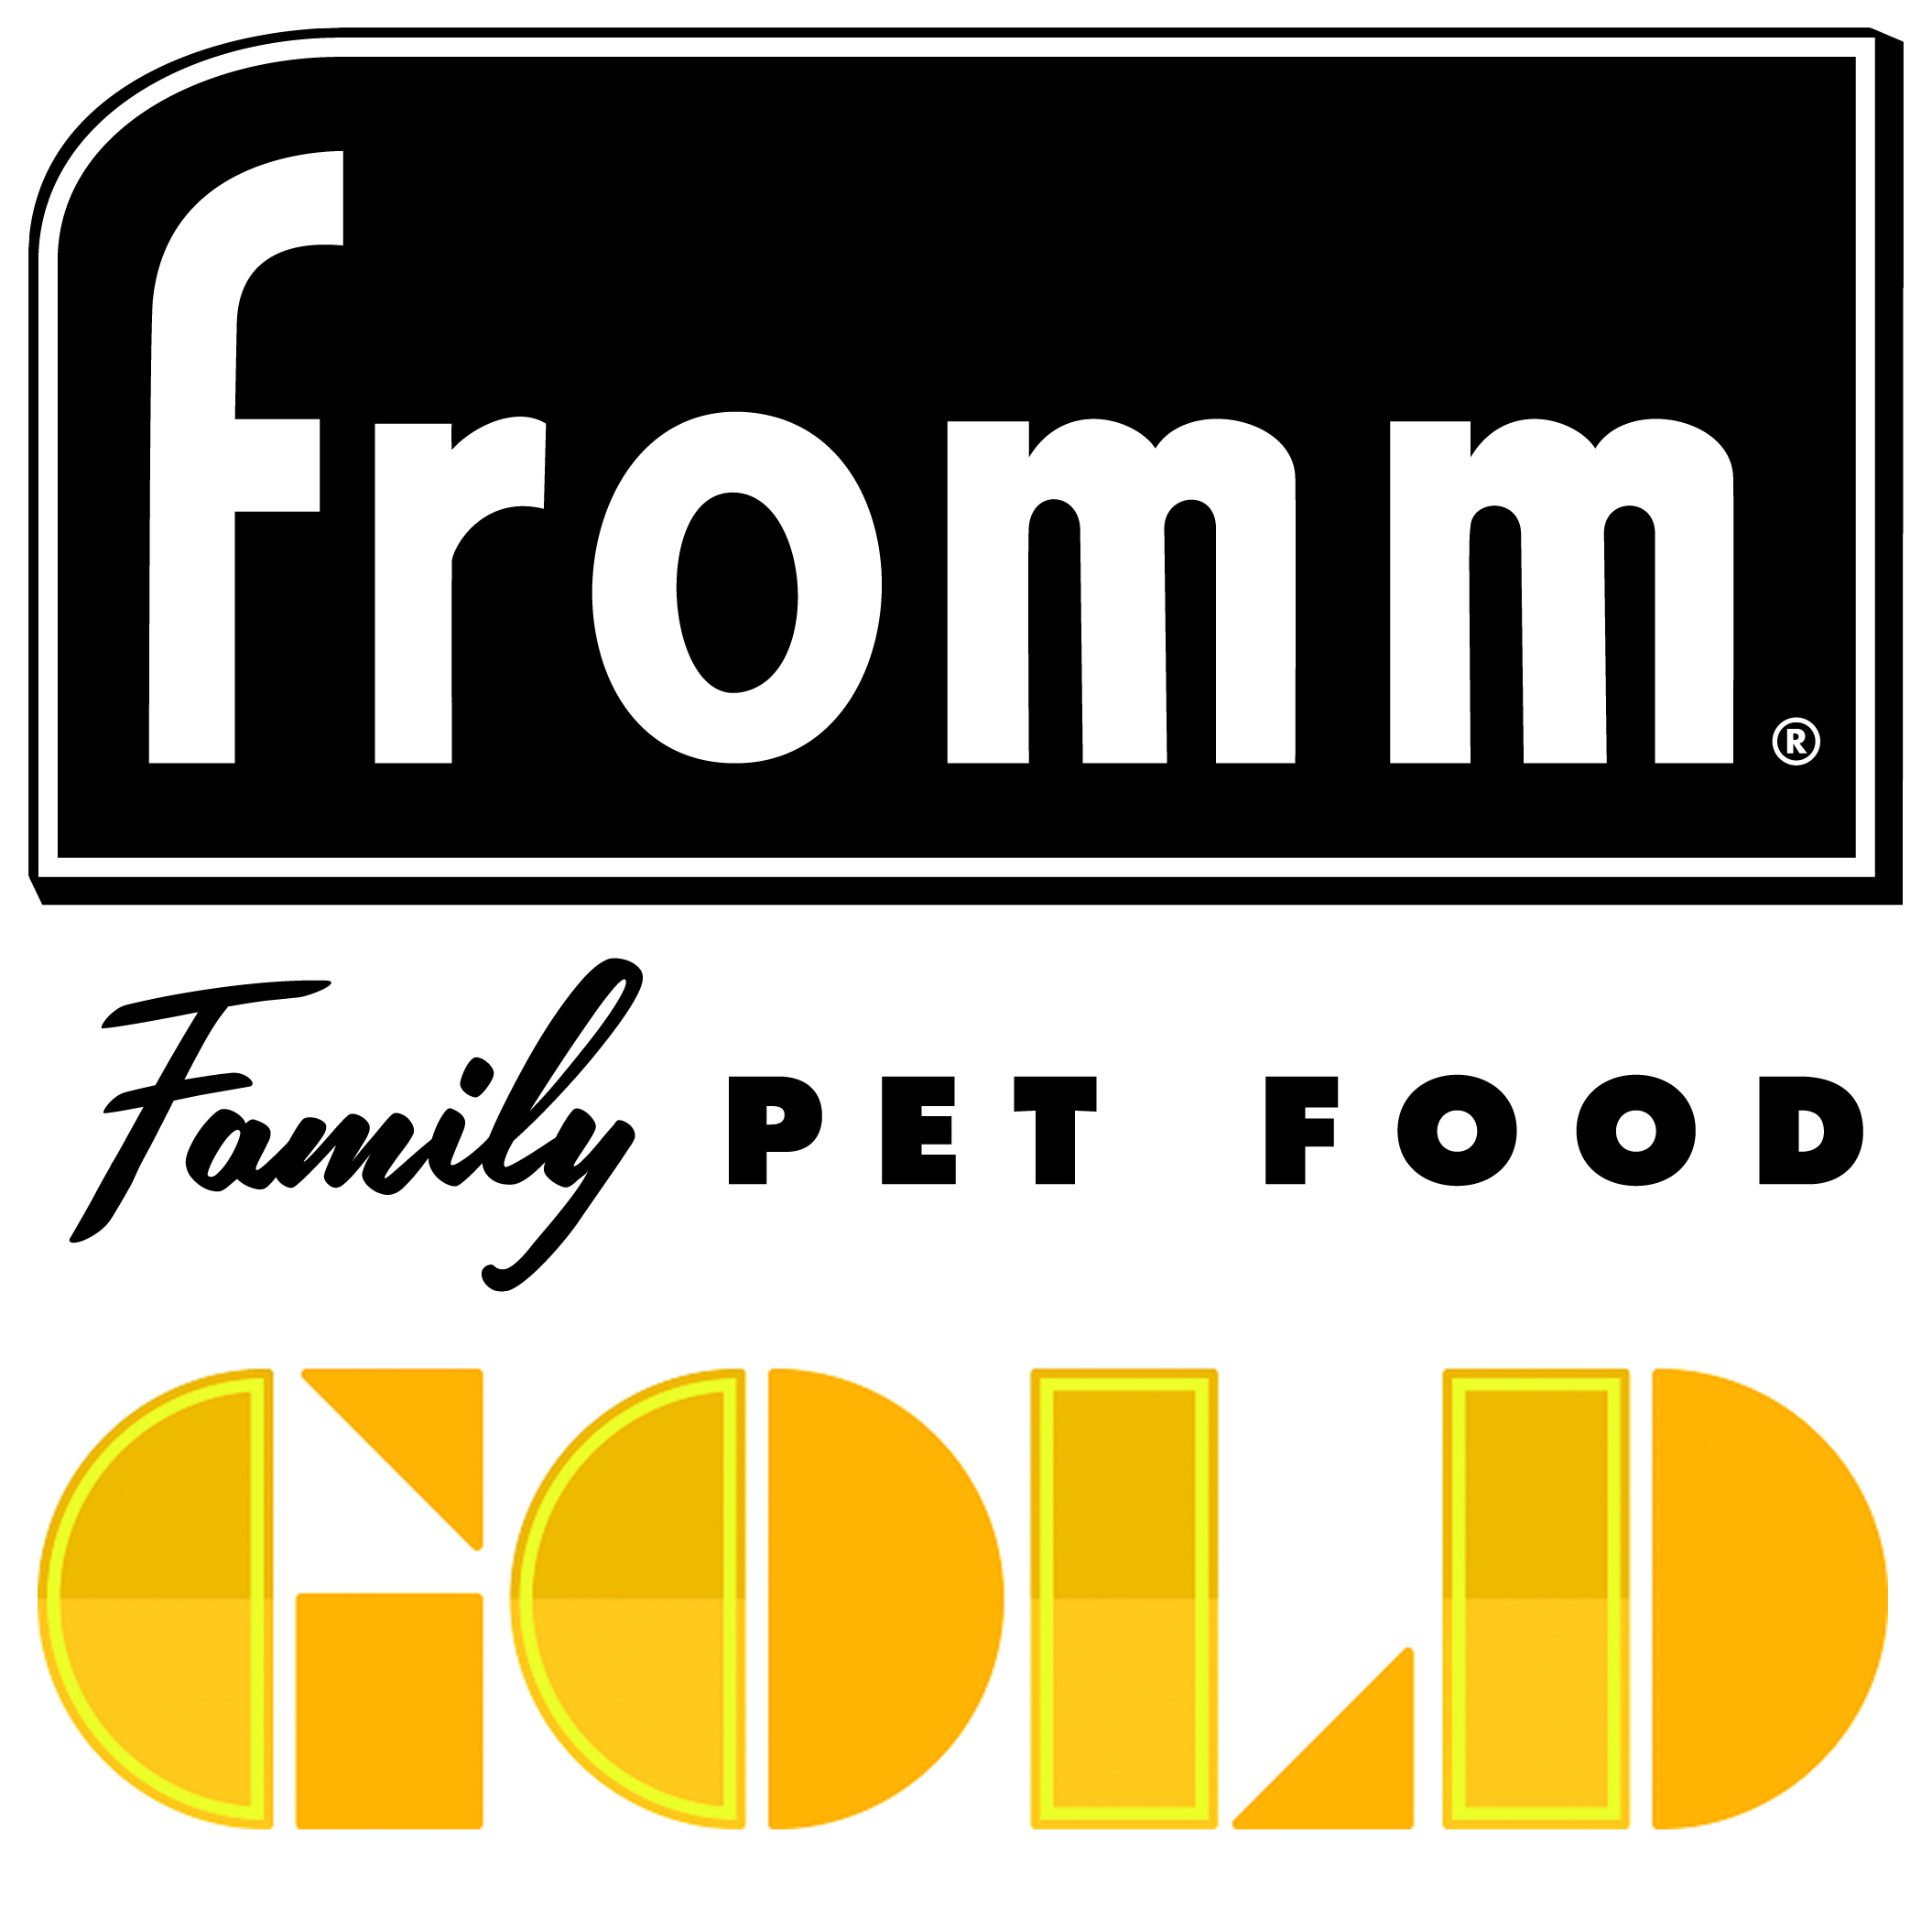 fromm adult gold small breed